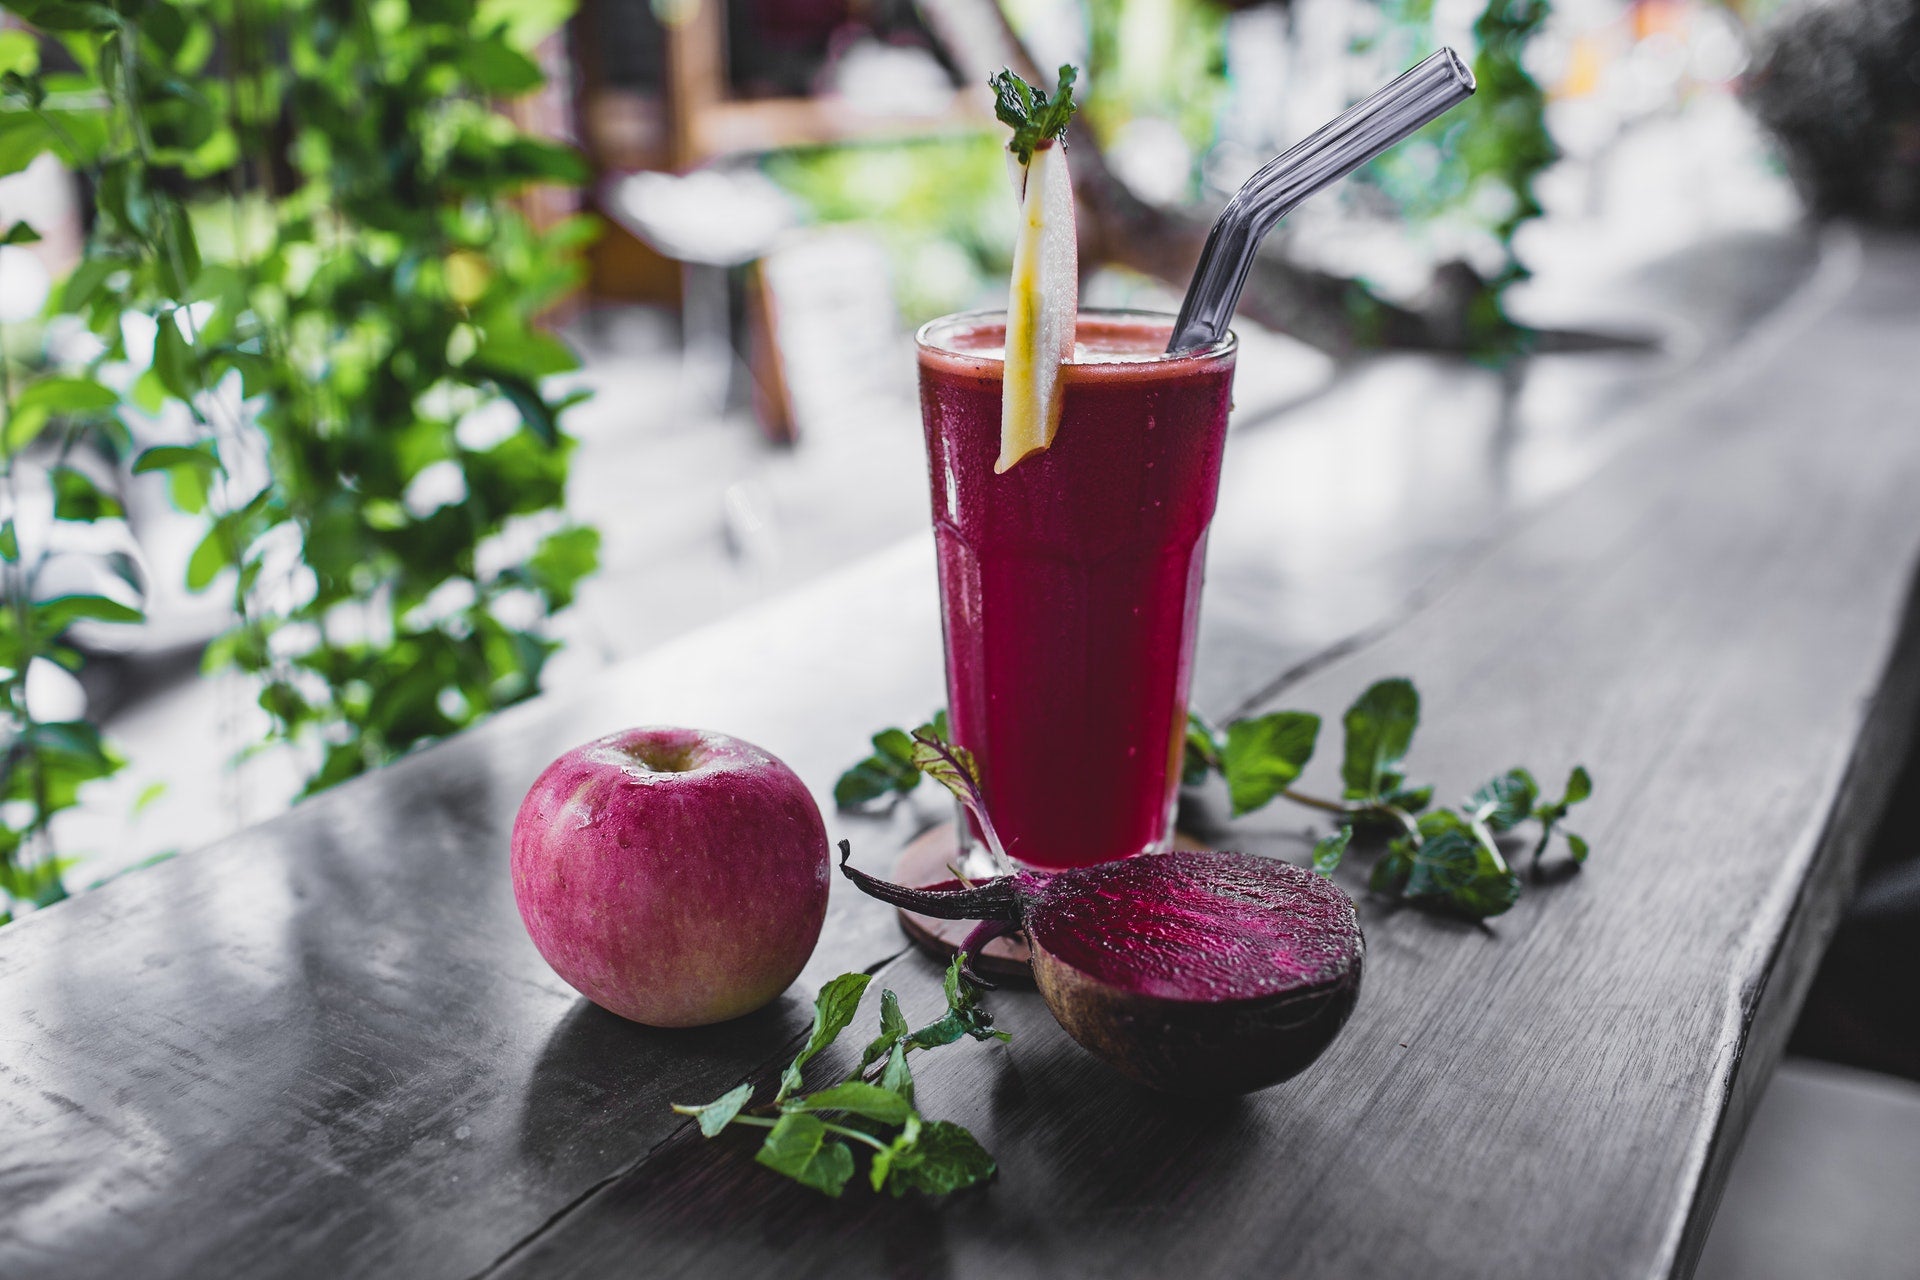 Thinking About Doing A Juice Cleanse For Fast Summer Weight Loss? Read This First.